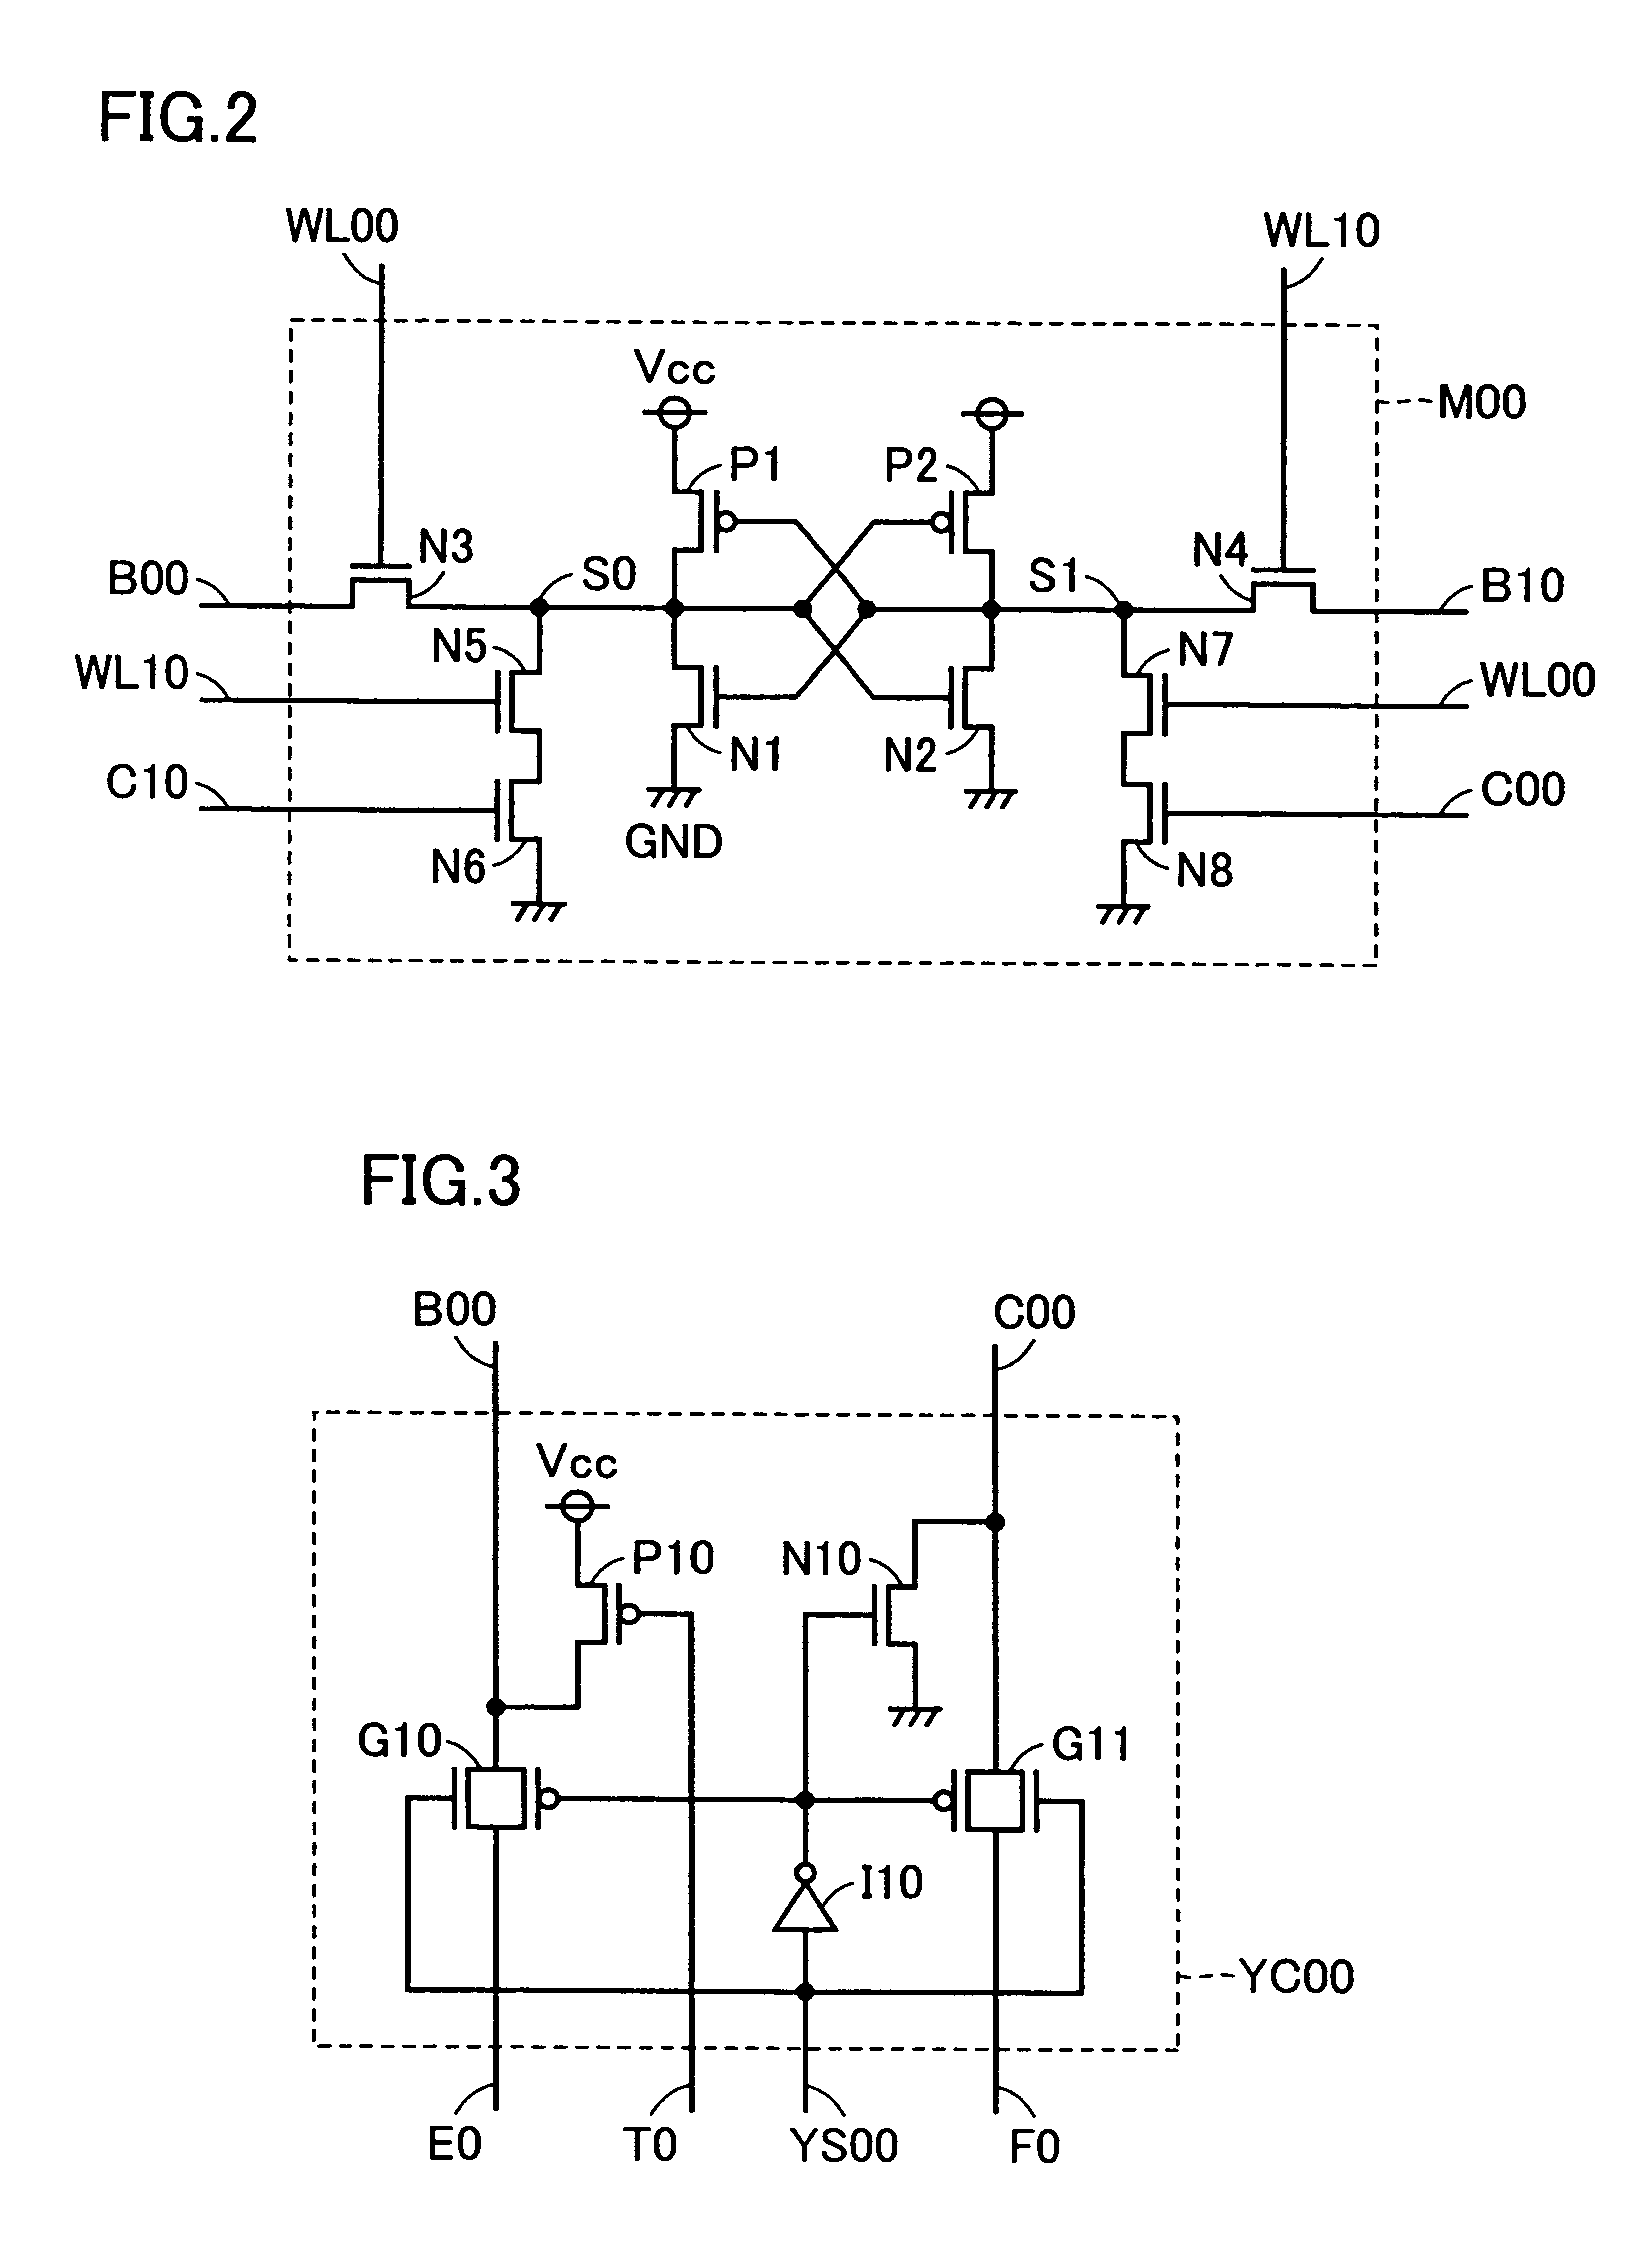 Multiport semiconductor memory device capable of sufficiently steadily holding data and providing a sufficient write margin